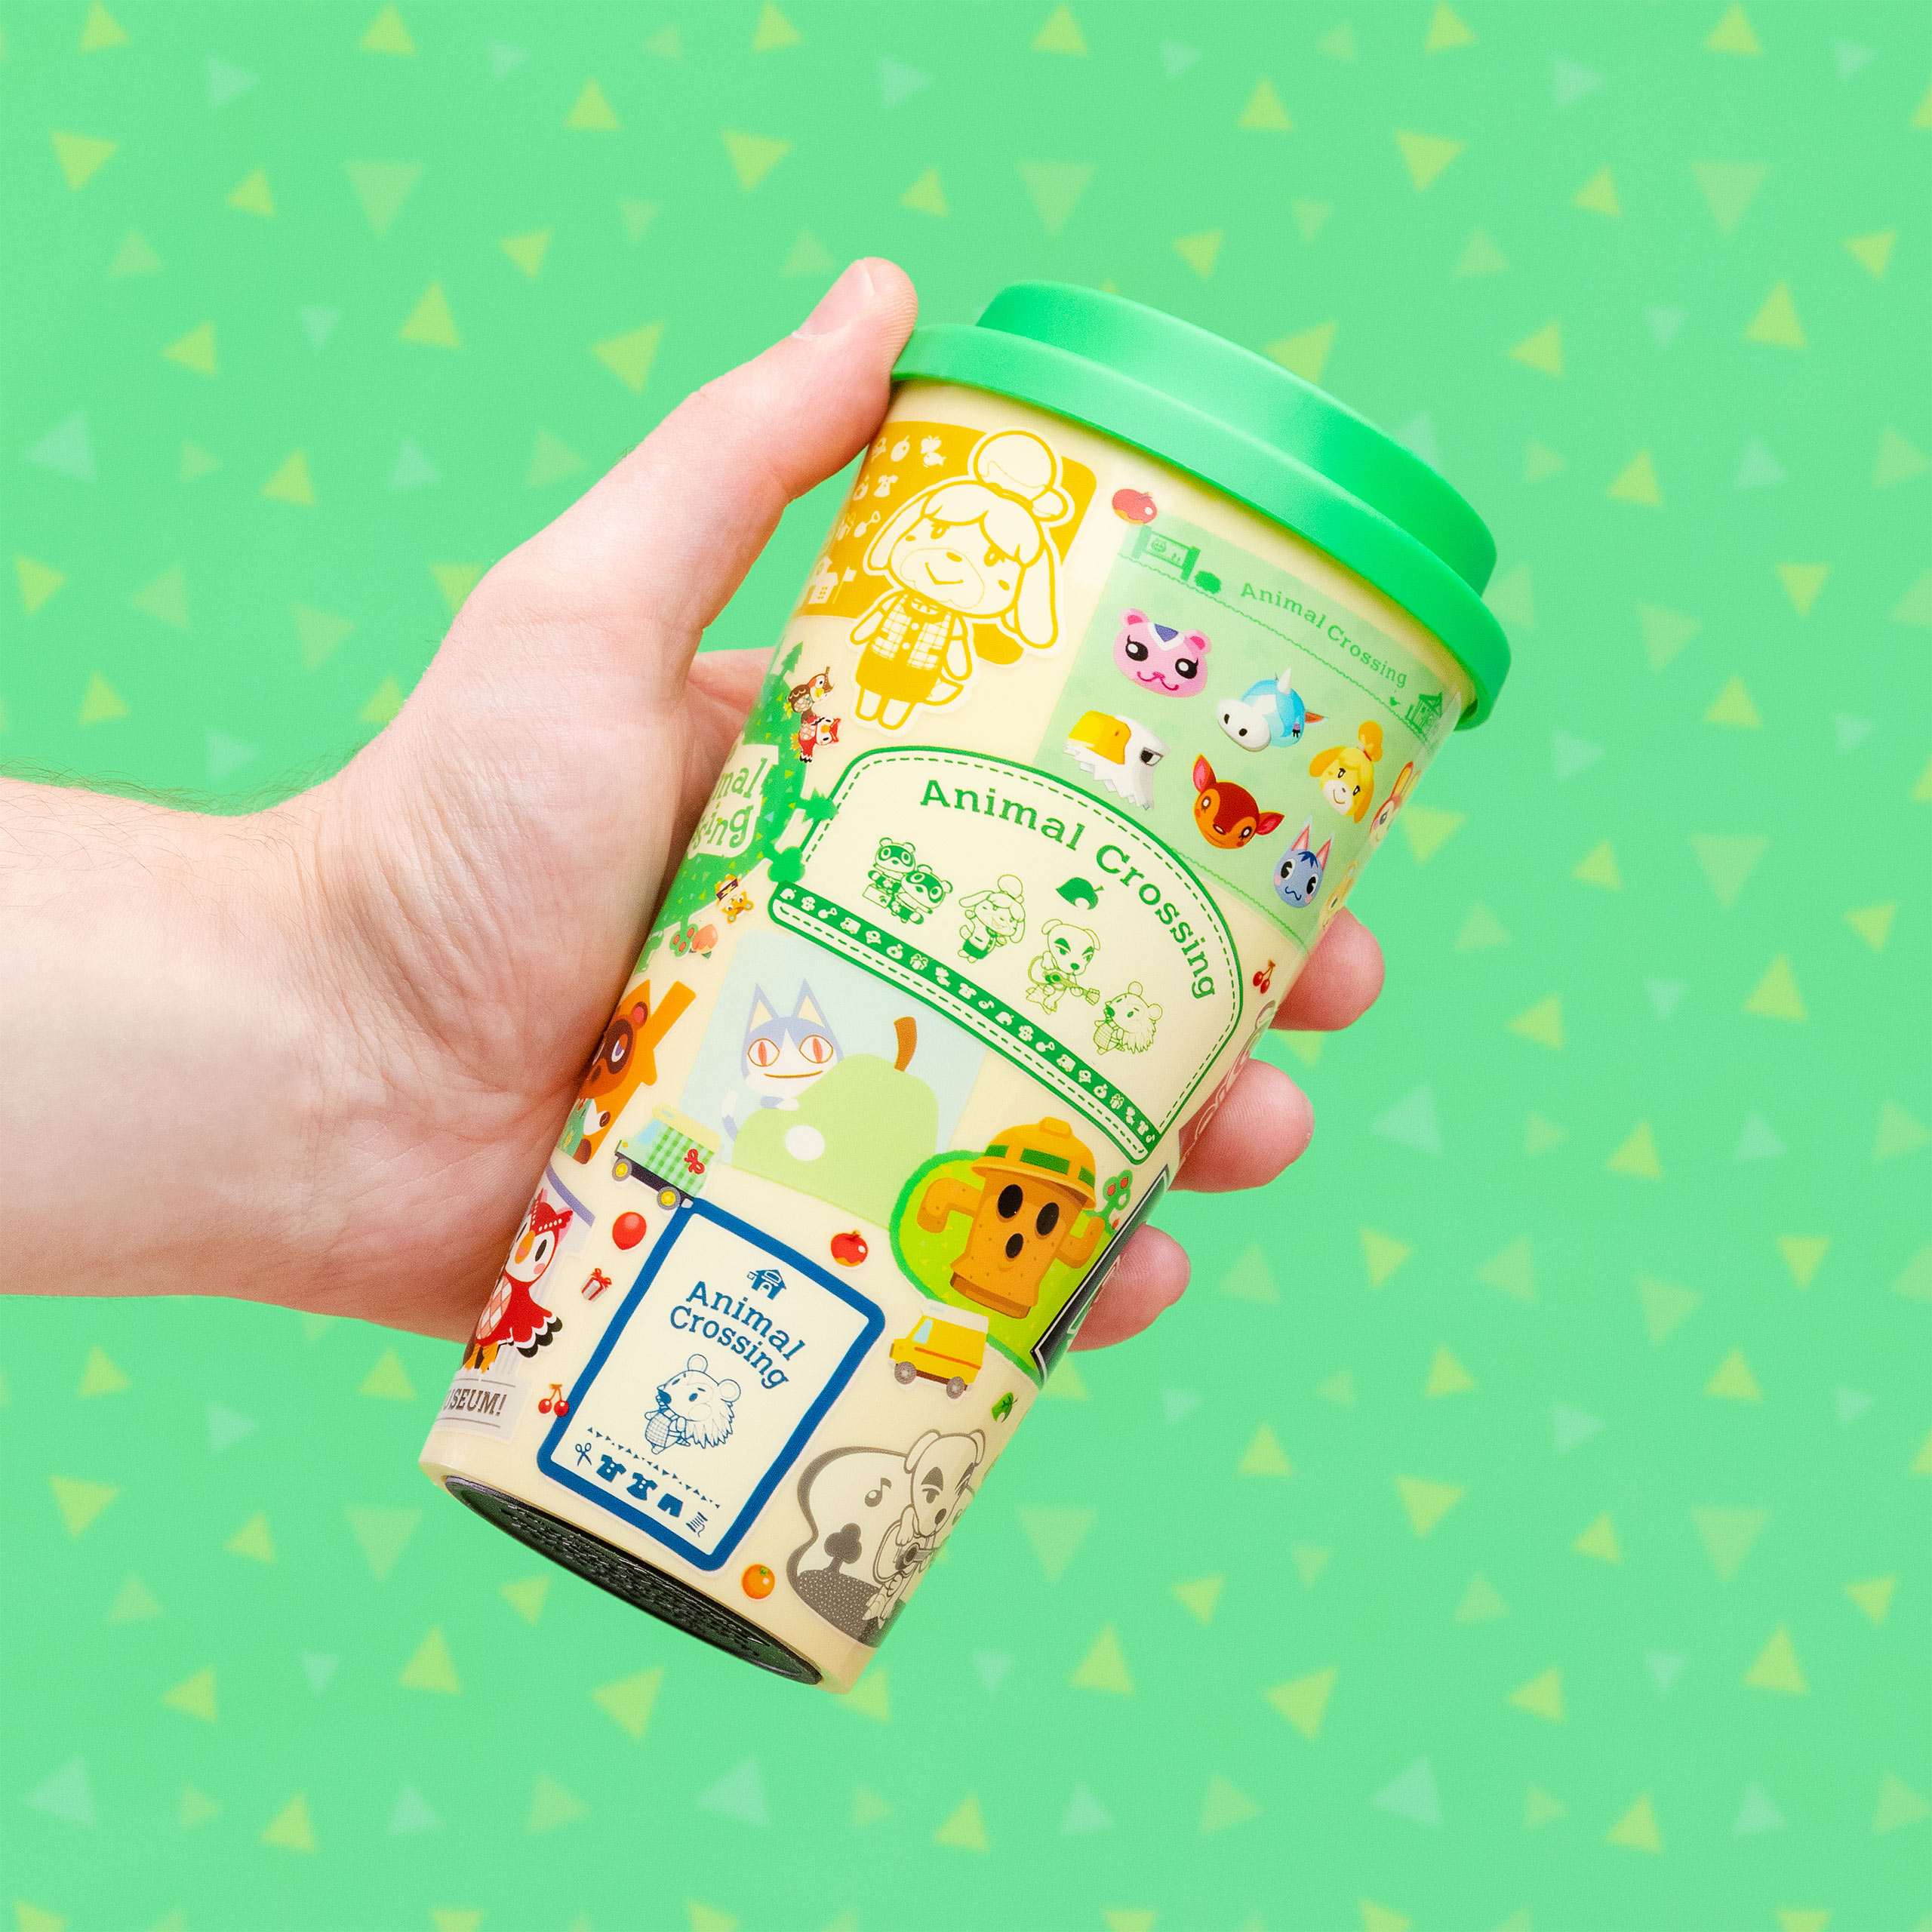 Animal Crossing - Characters To Go Becher